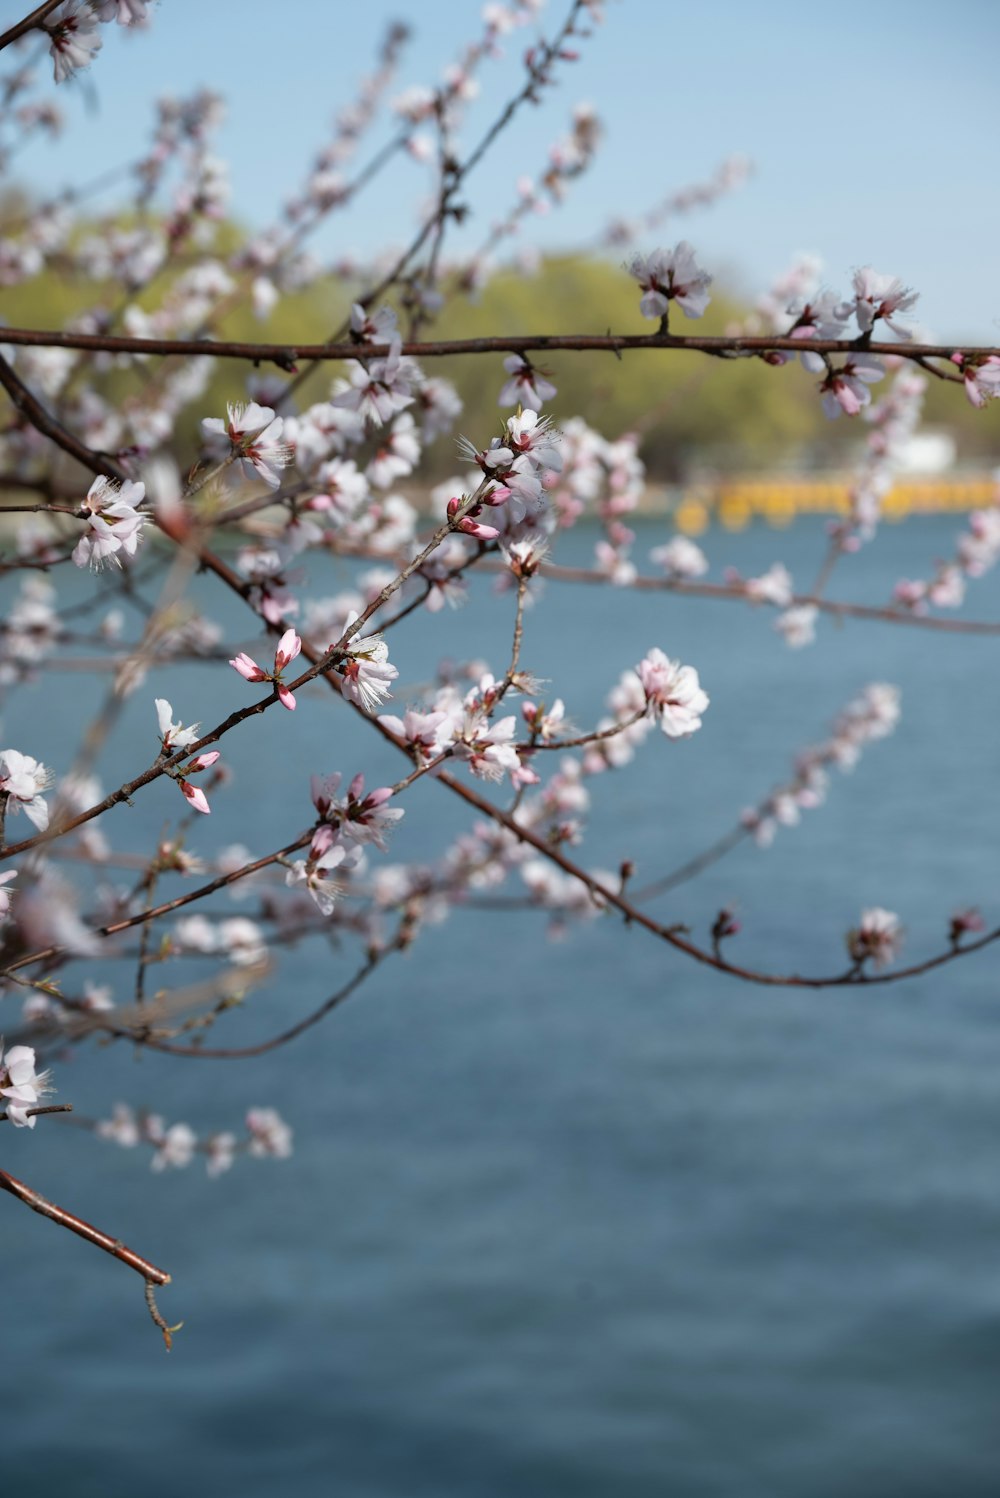 a branch with white flowers in front of a body of water